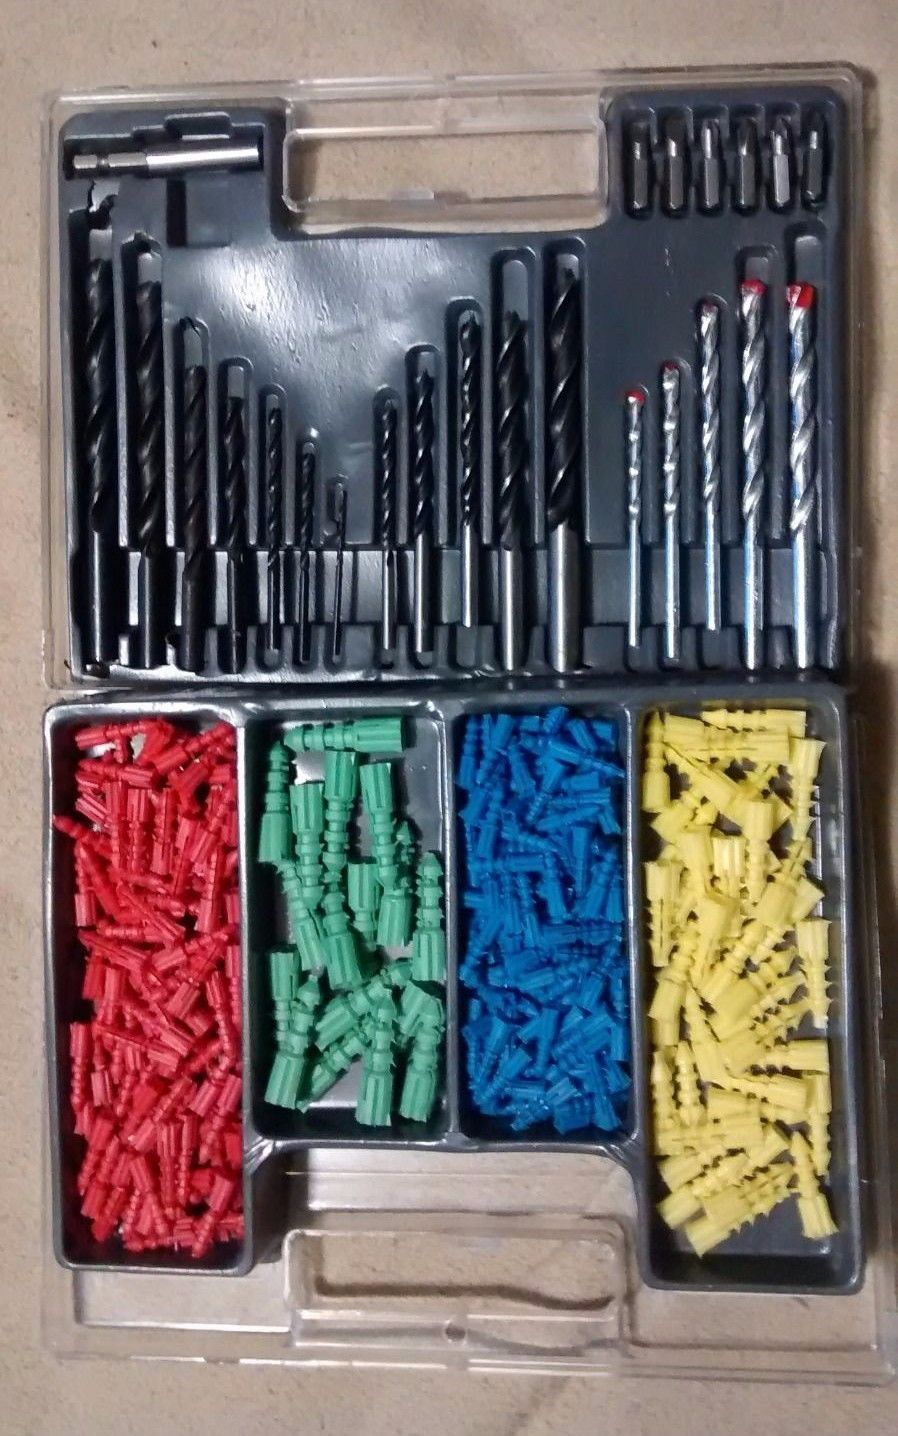 300 PC DRILL/DRIVER BITS & PLASTIC ANCHOR ASSORTMENT KIT WITH CASE - $6.65